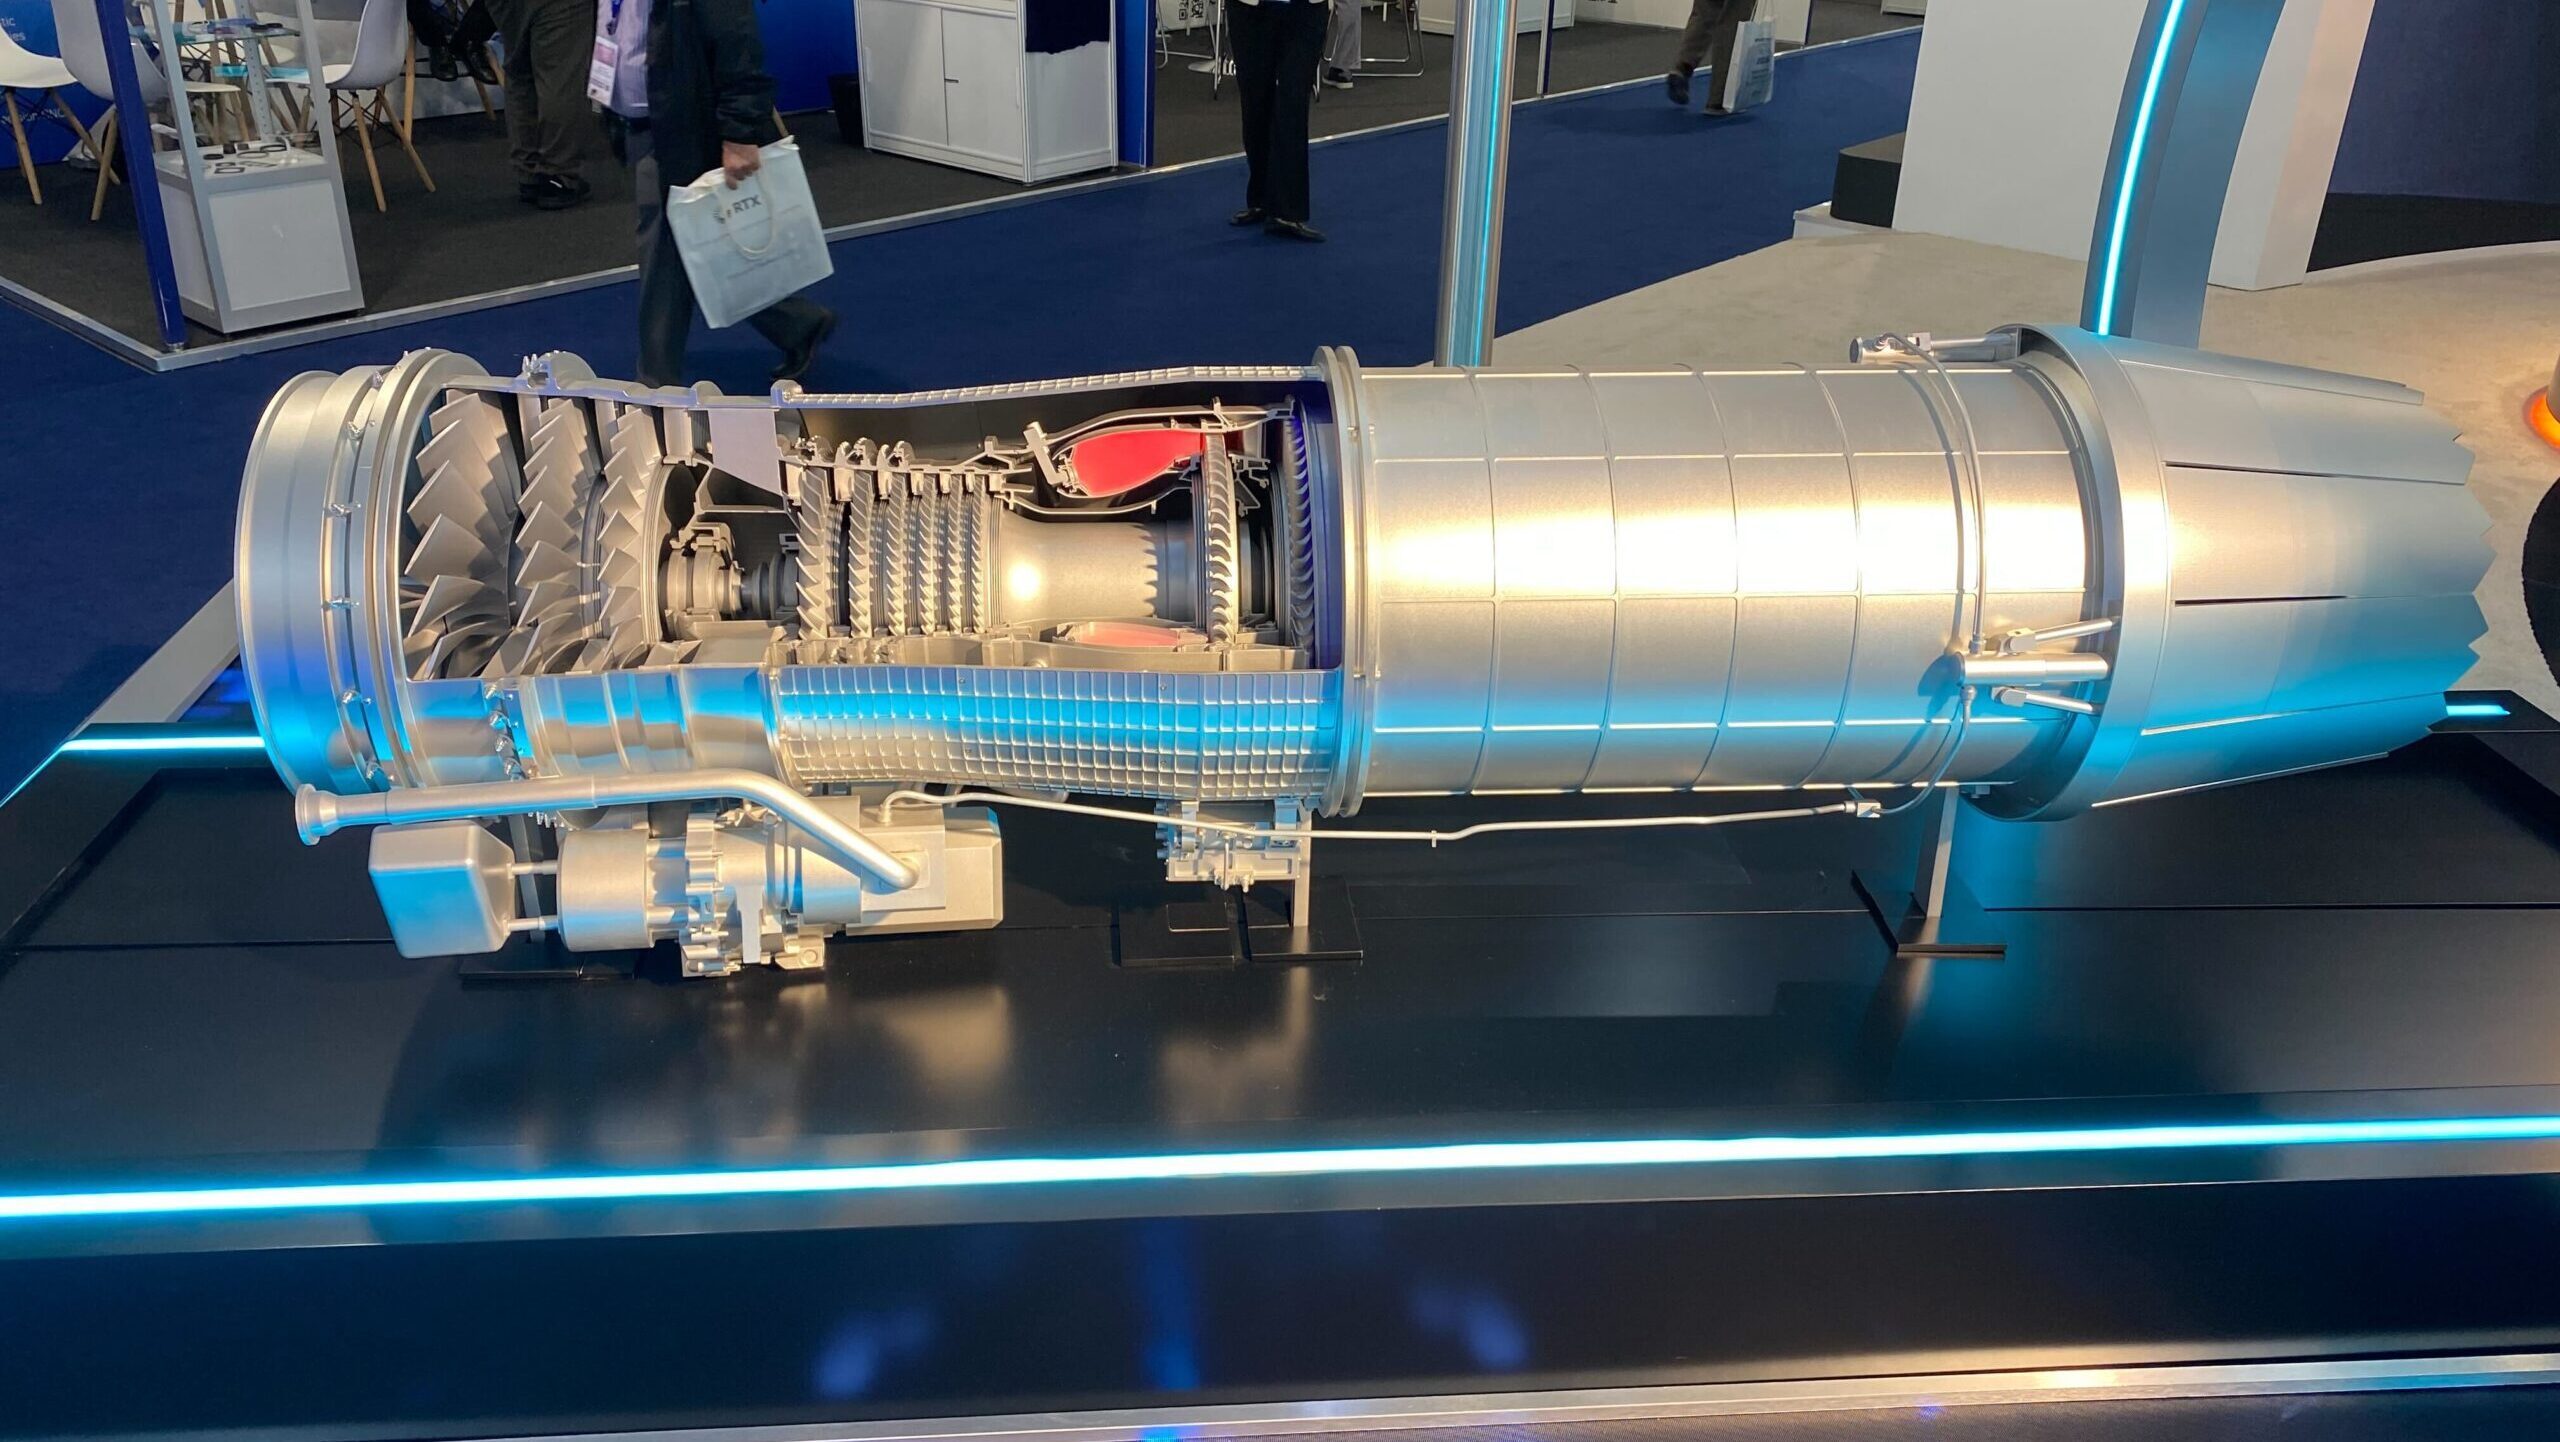 South Korea’s Hanwha shows off prototype aircraft engine, says could enter service in 9 years